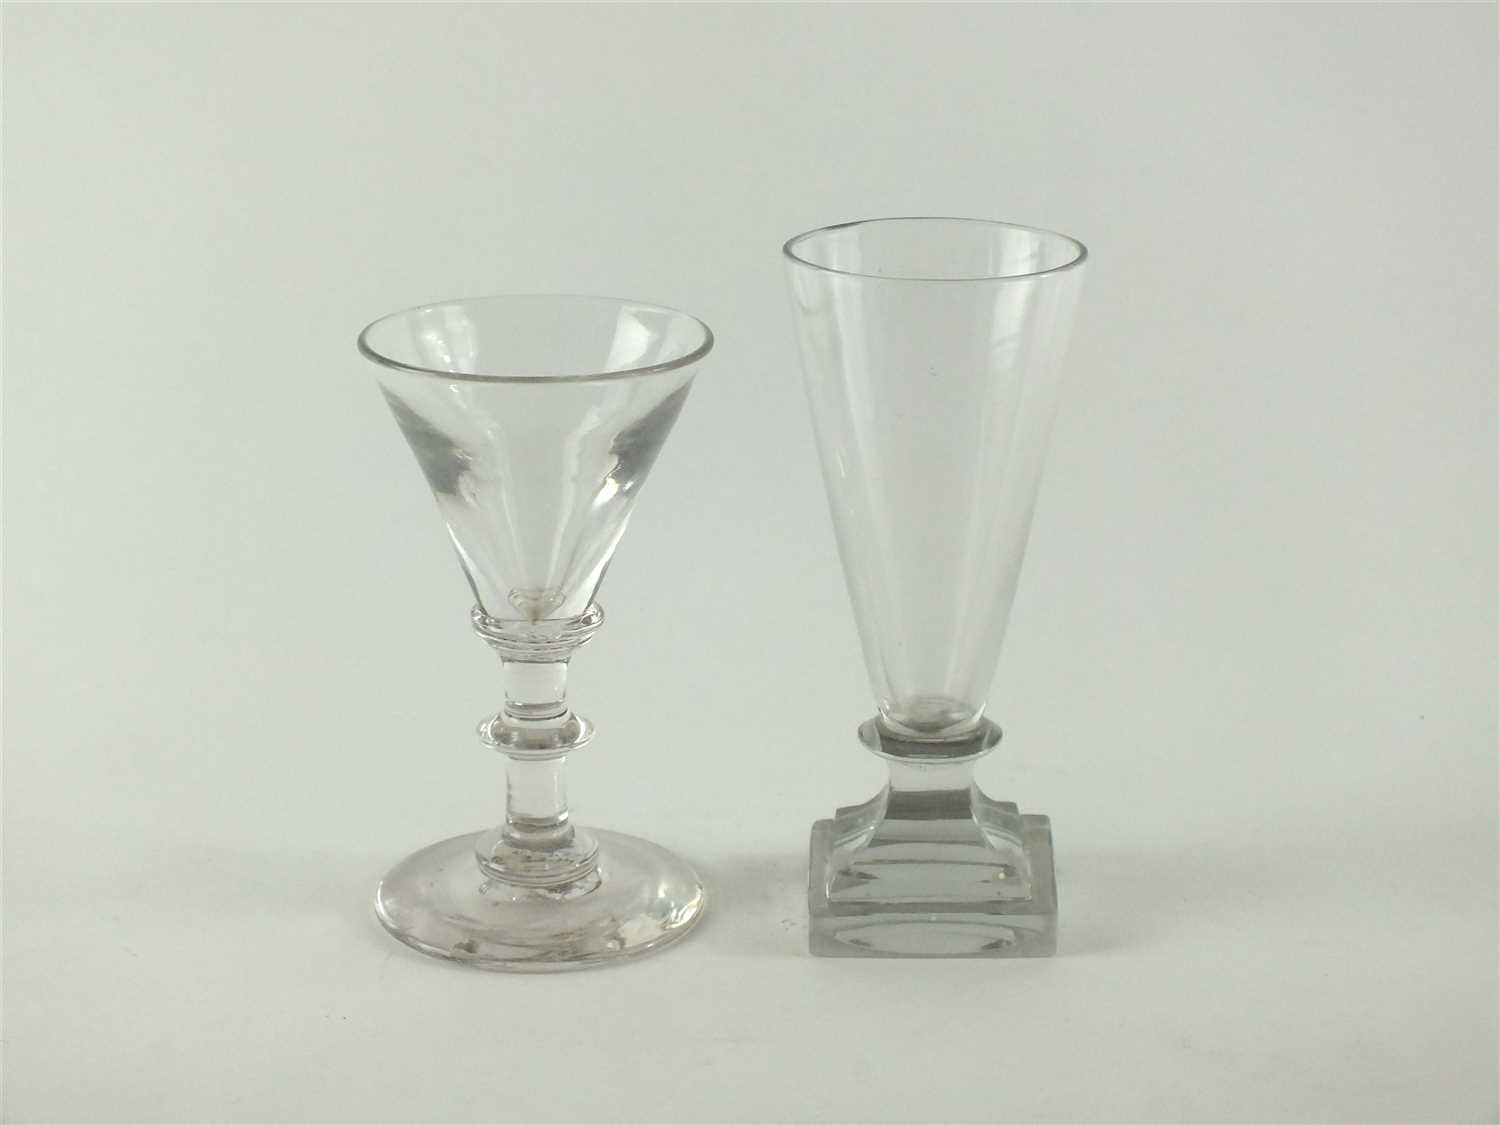 Lot 133 - An unusual 18th century dwarf ale firing glass and a 19th century wine glass